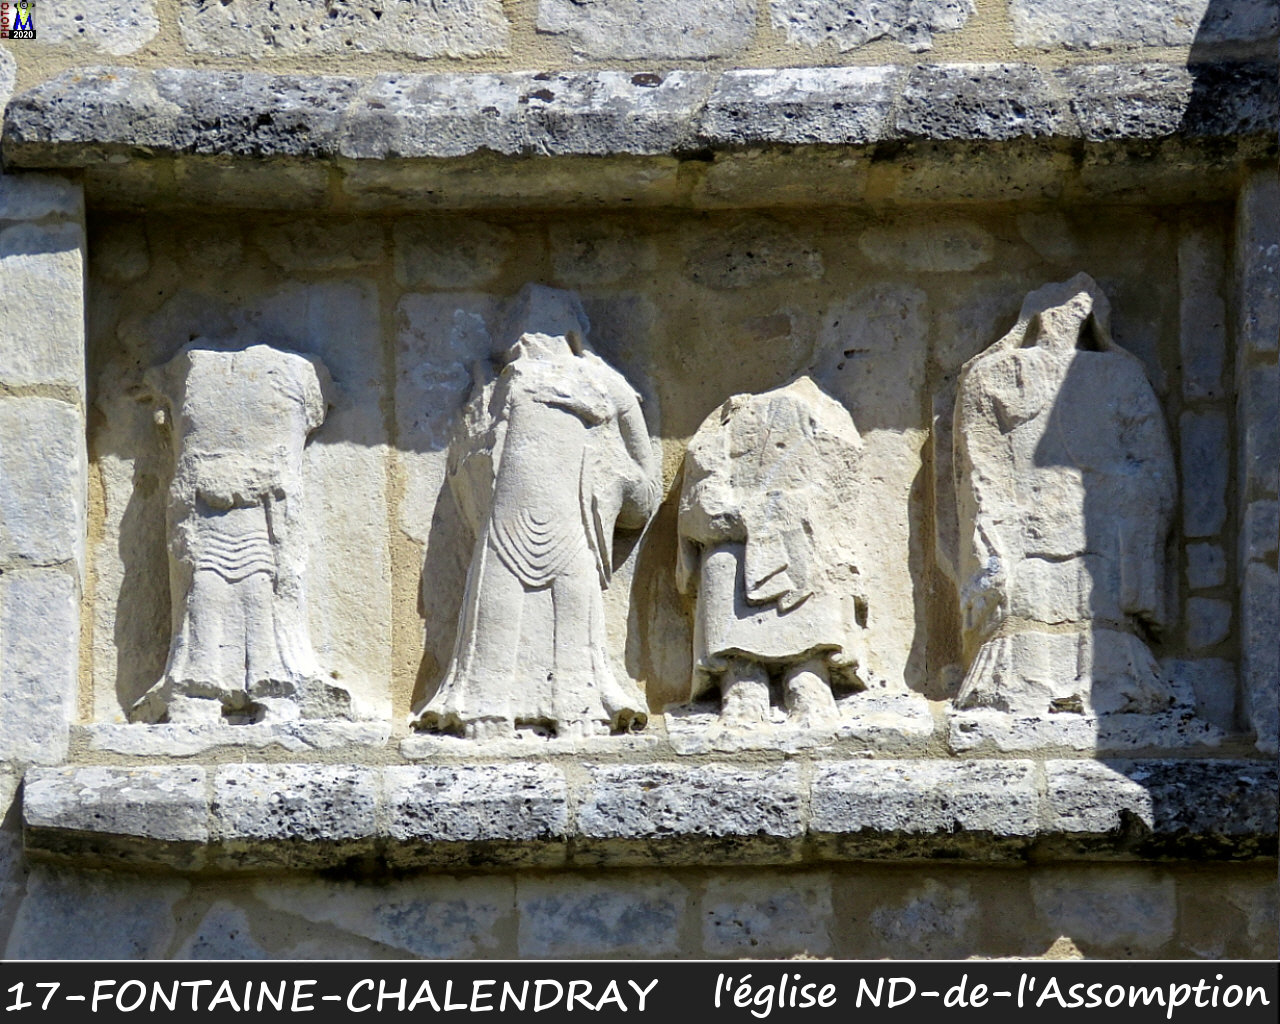 17FONTAINE-CHALENDRAY_eglise_1026.jpg